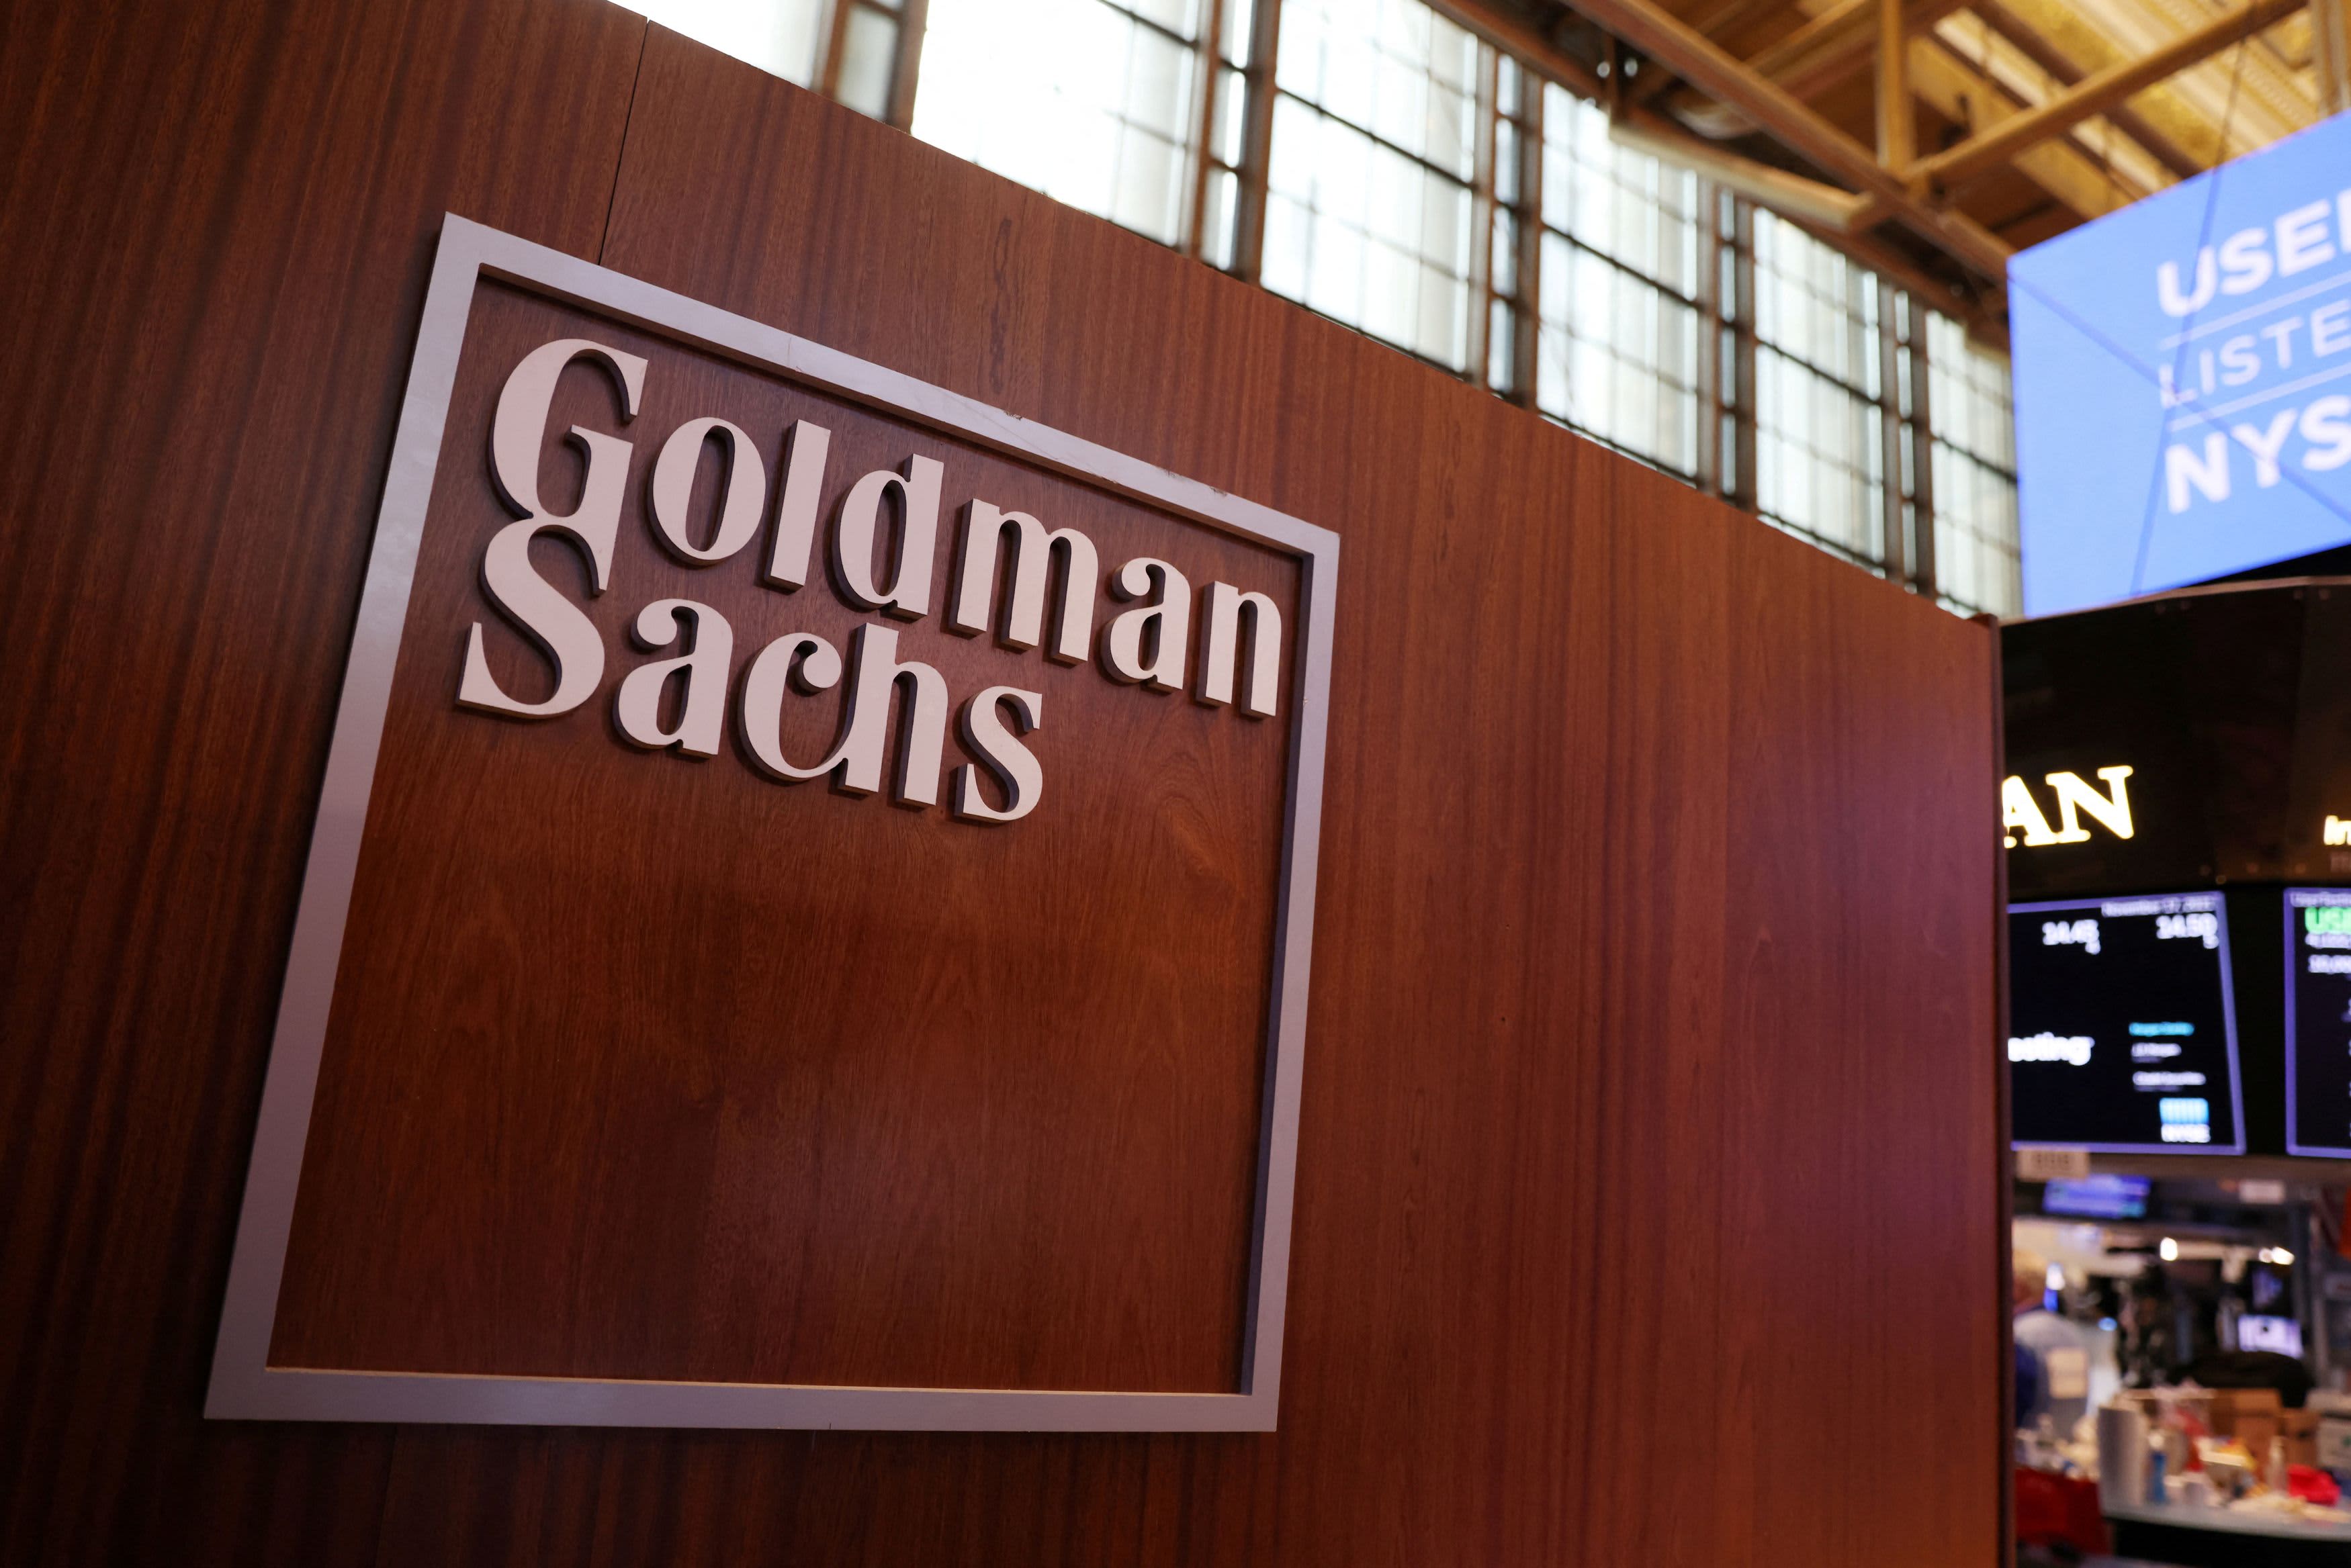 Wells Fargo hikes Goldman Sachs price target, says stock is undervalued relative to peers